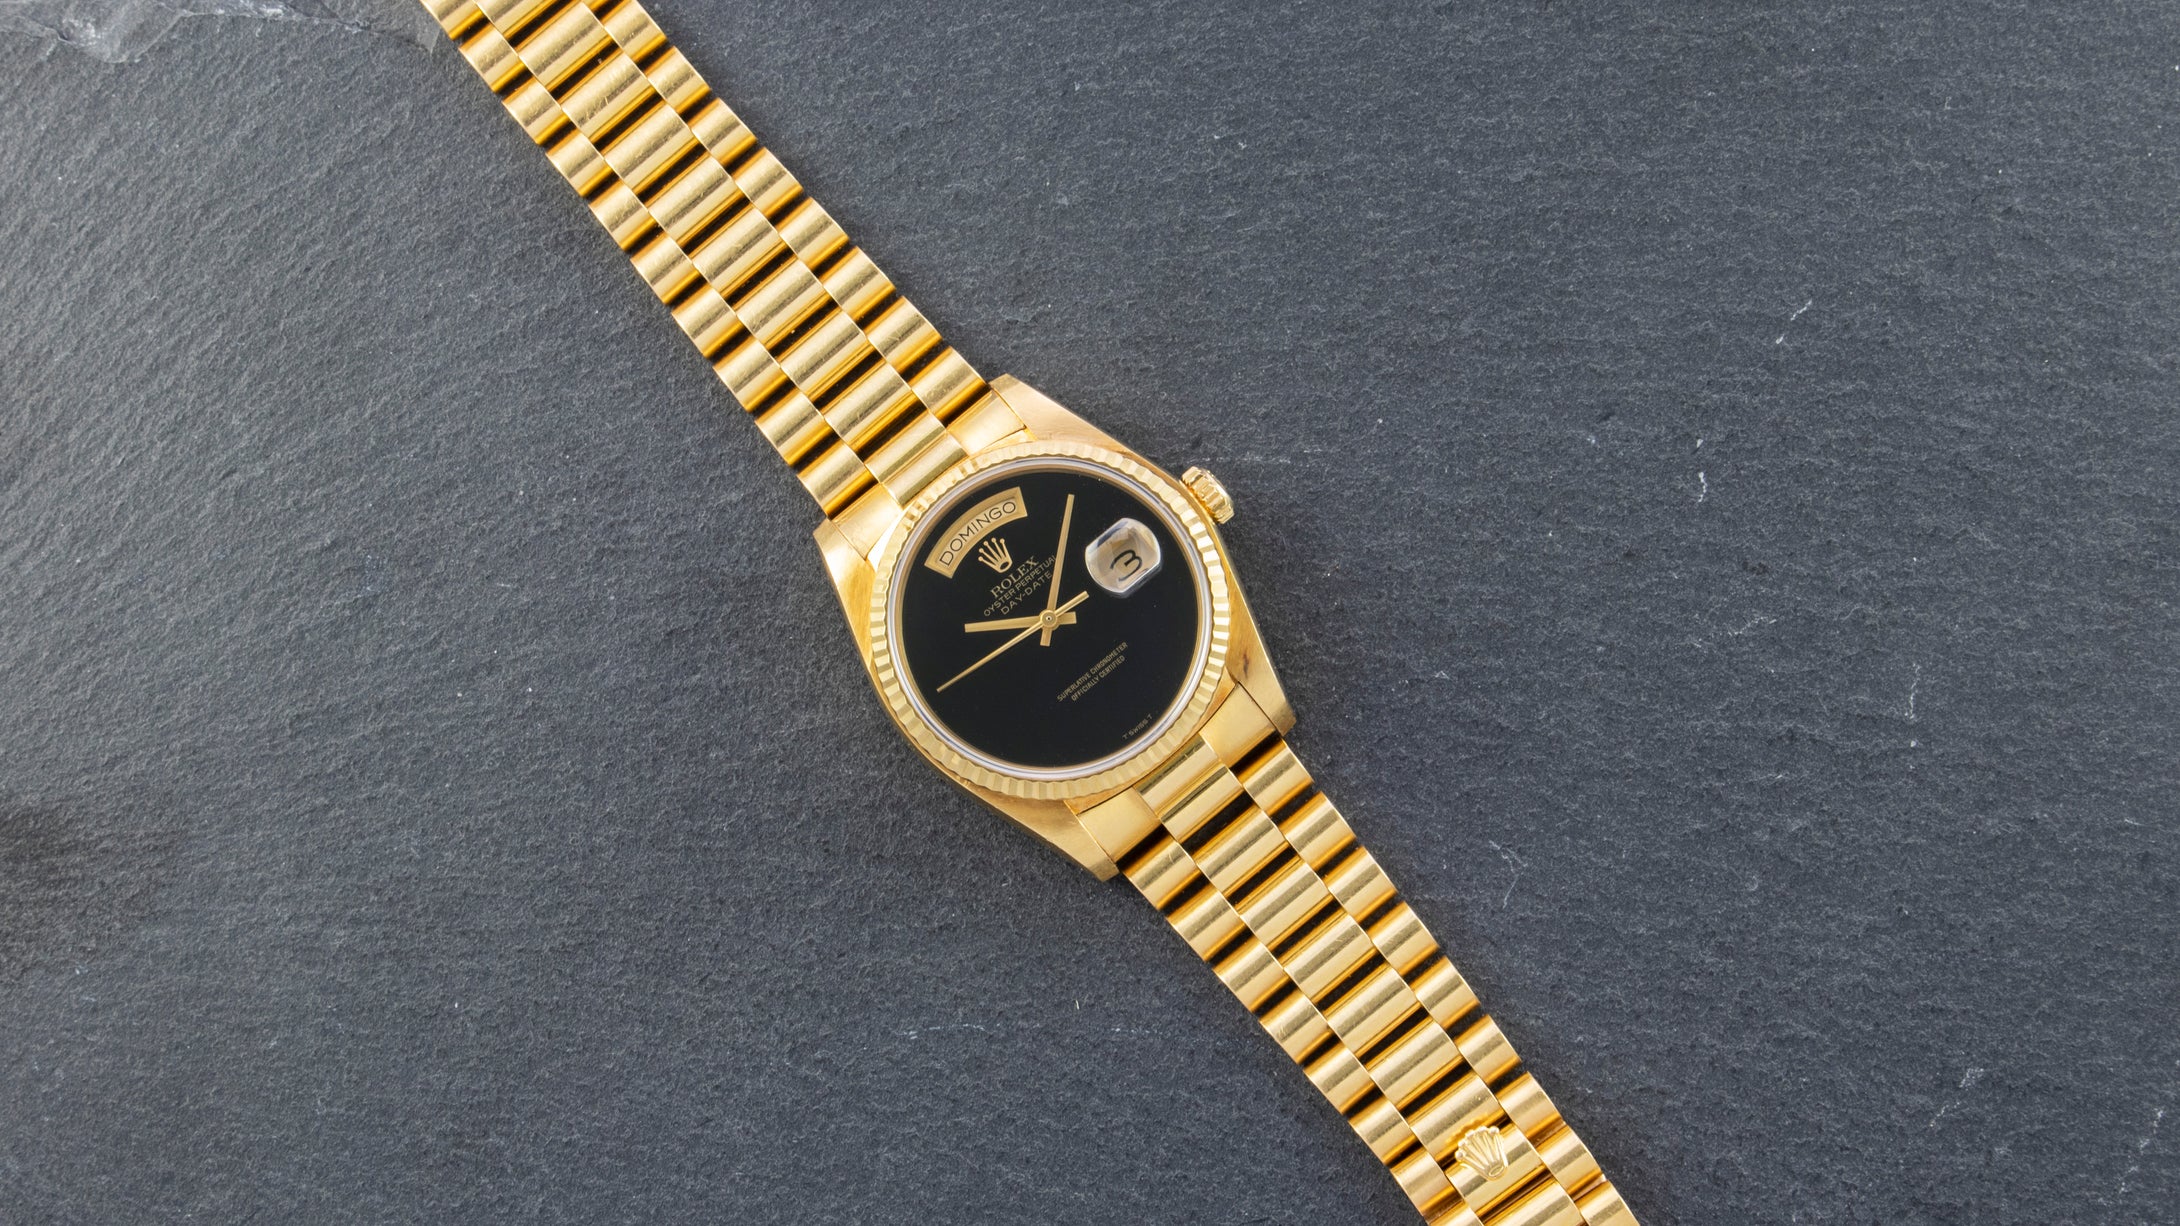 Rolex 18K Yellow Gold Oyster Perpetual Day-Date President Vintage Watch with Black Onyx Dial and Papers | Veralet